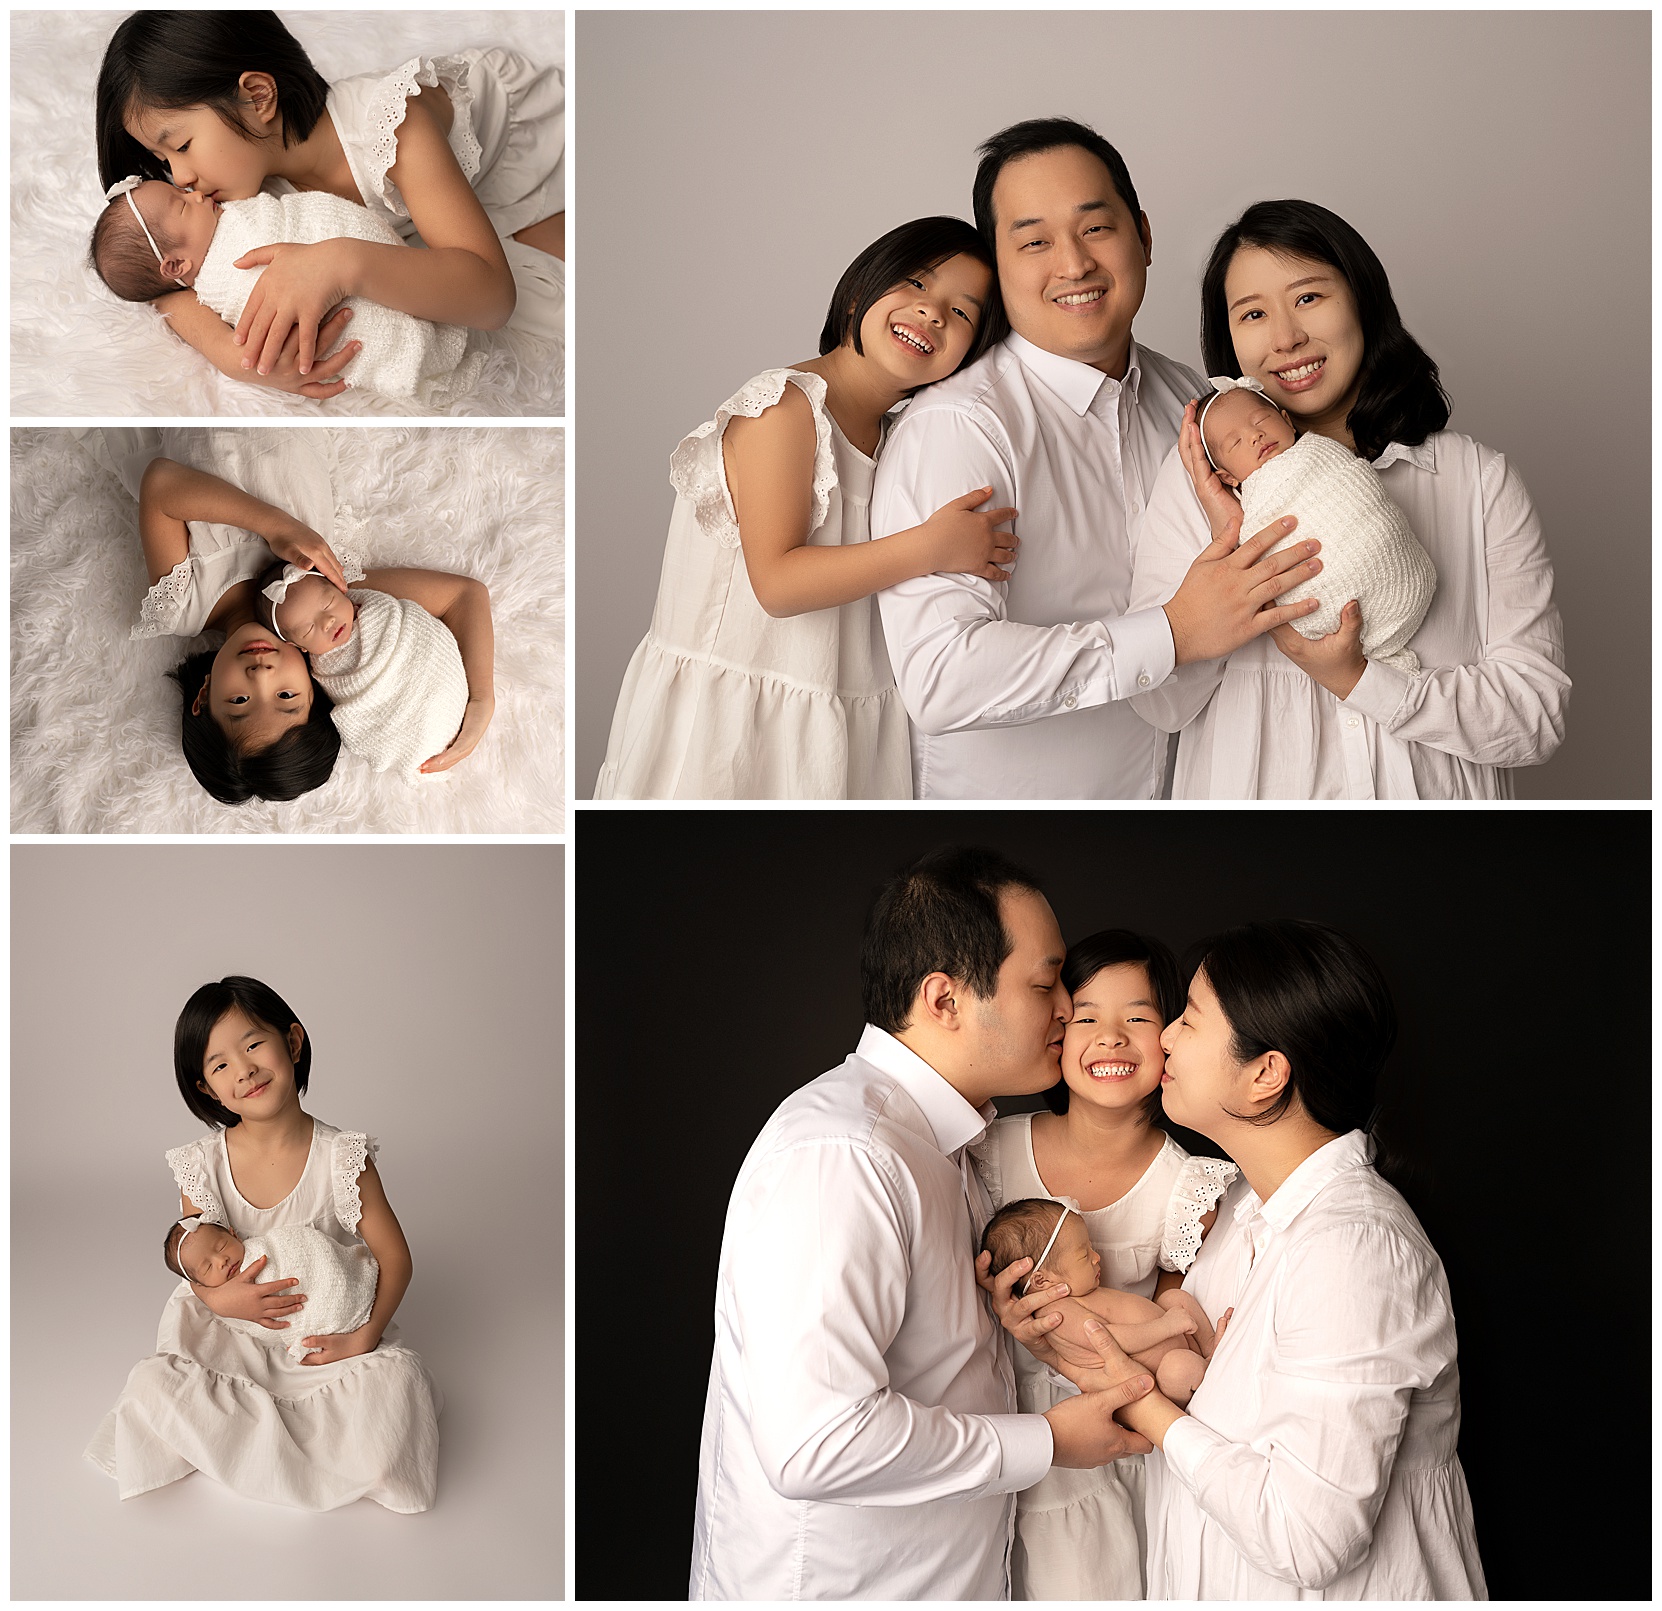 Family photo montage featuring a man, woman, small girl, and newborn baby